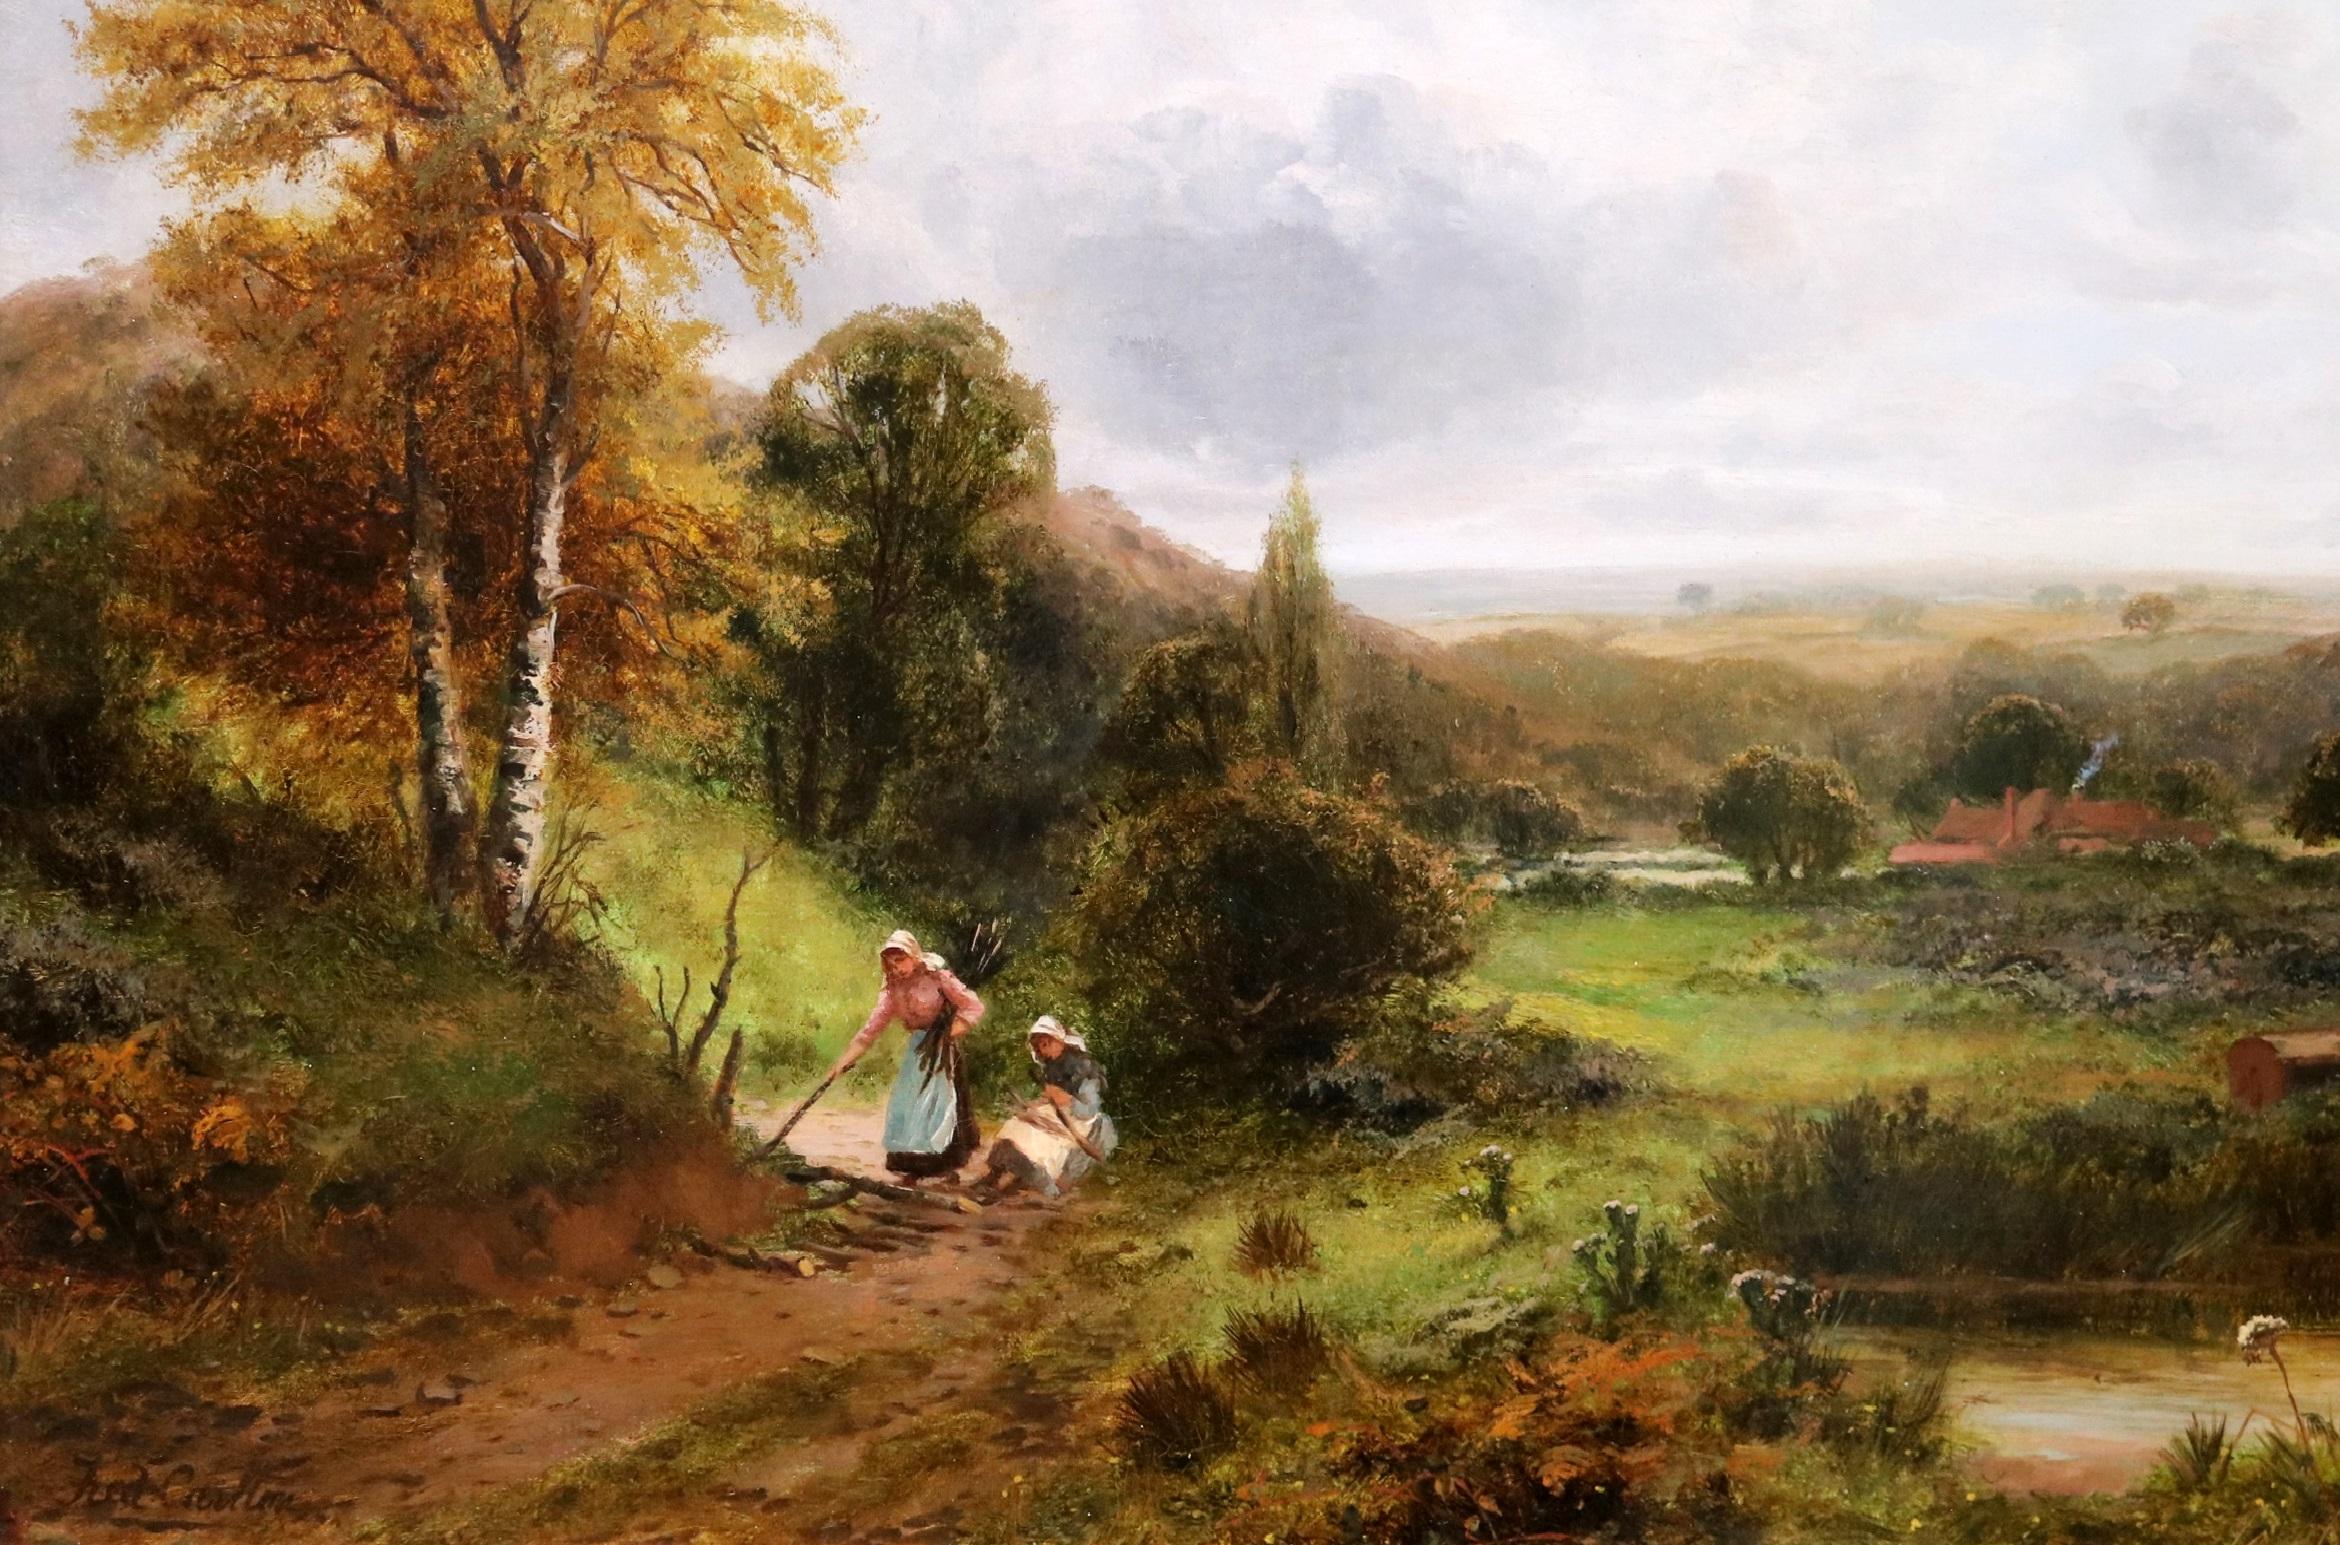 Faggot Gatherers, Surrey - 19th Century English Landscape Oil Painting - Brown Landscape Painting by Frederick Carlton